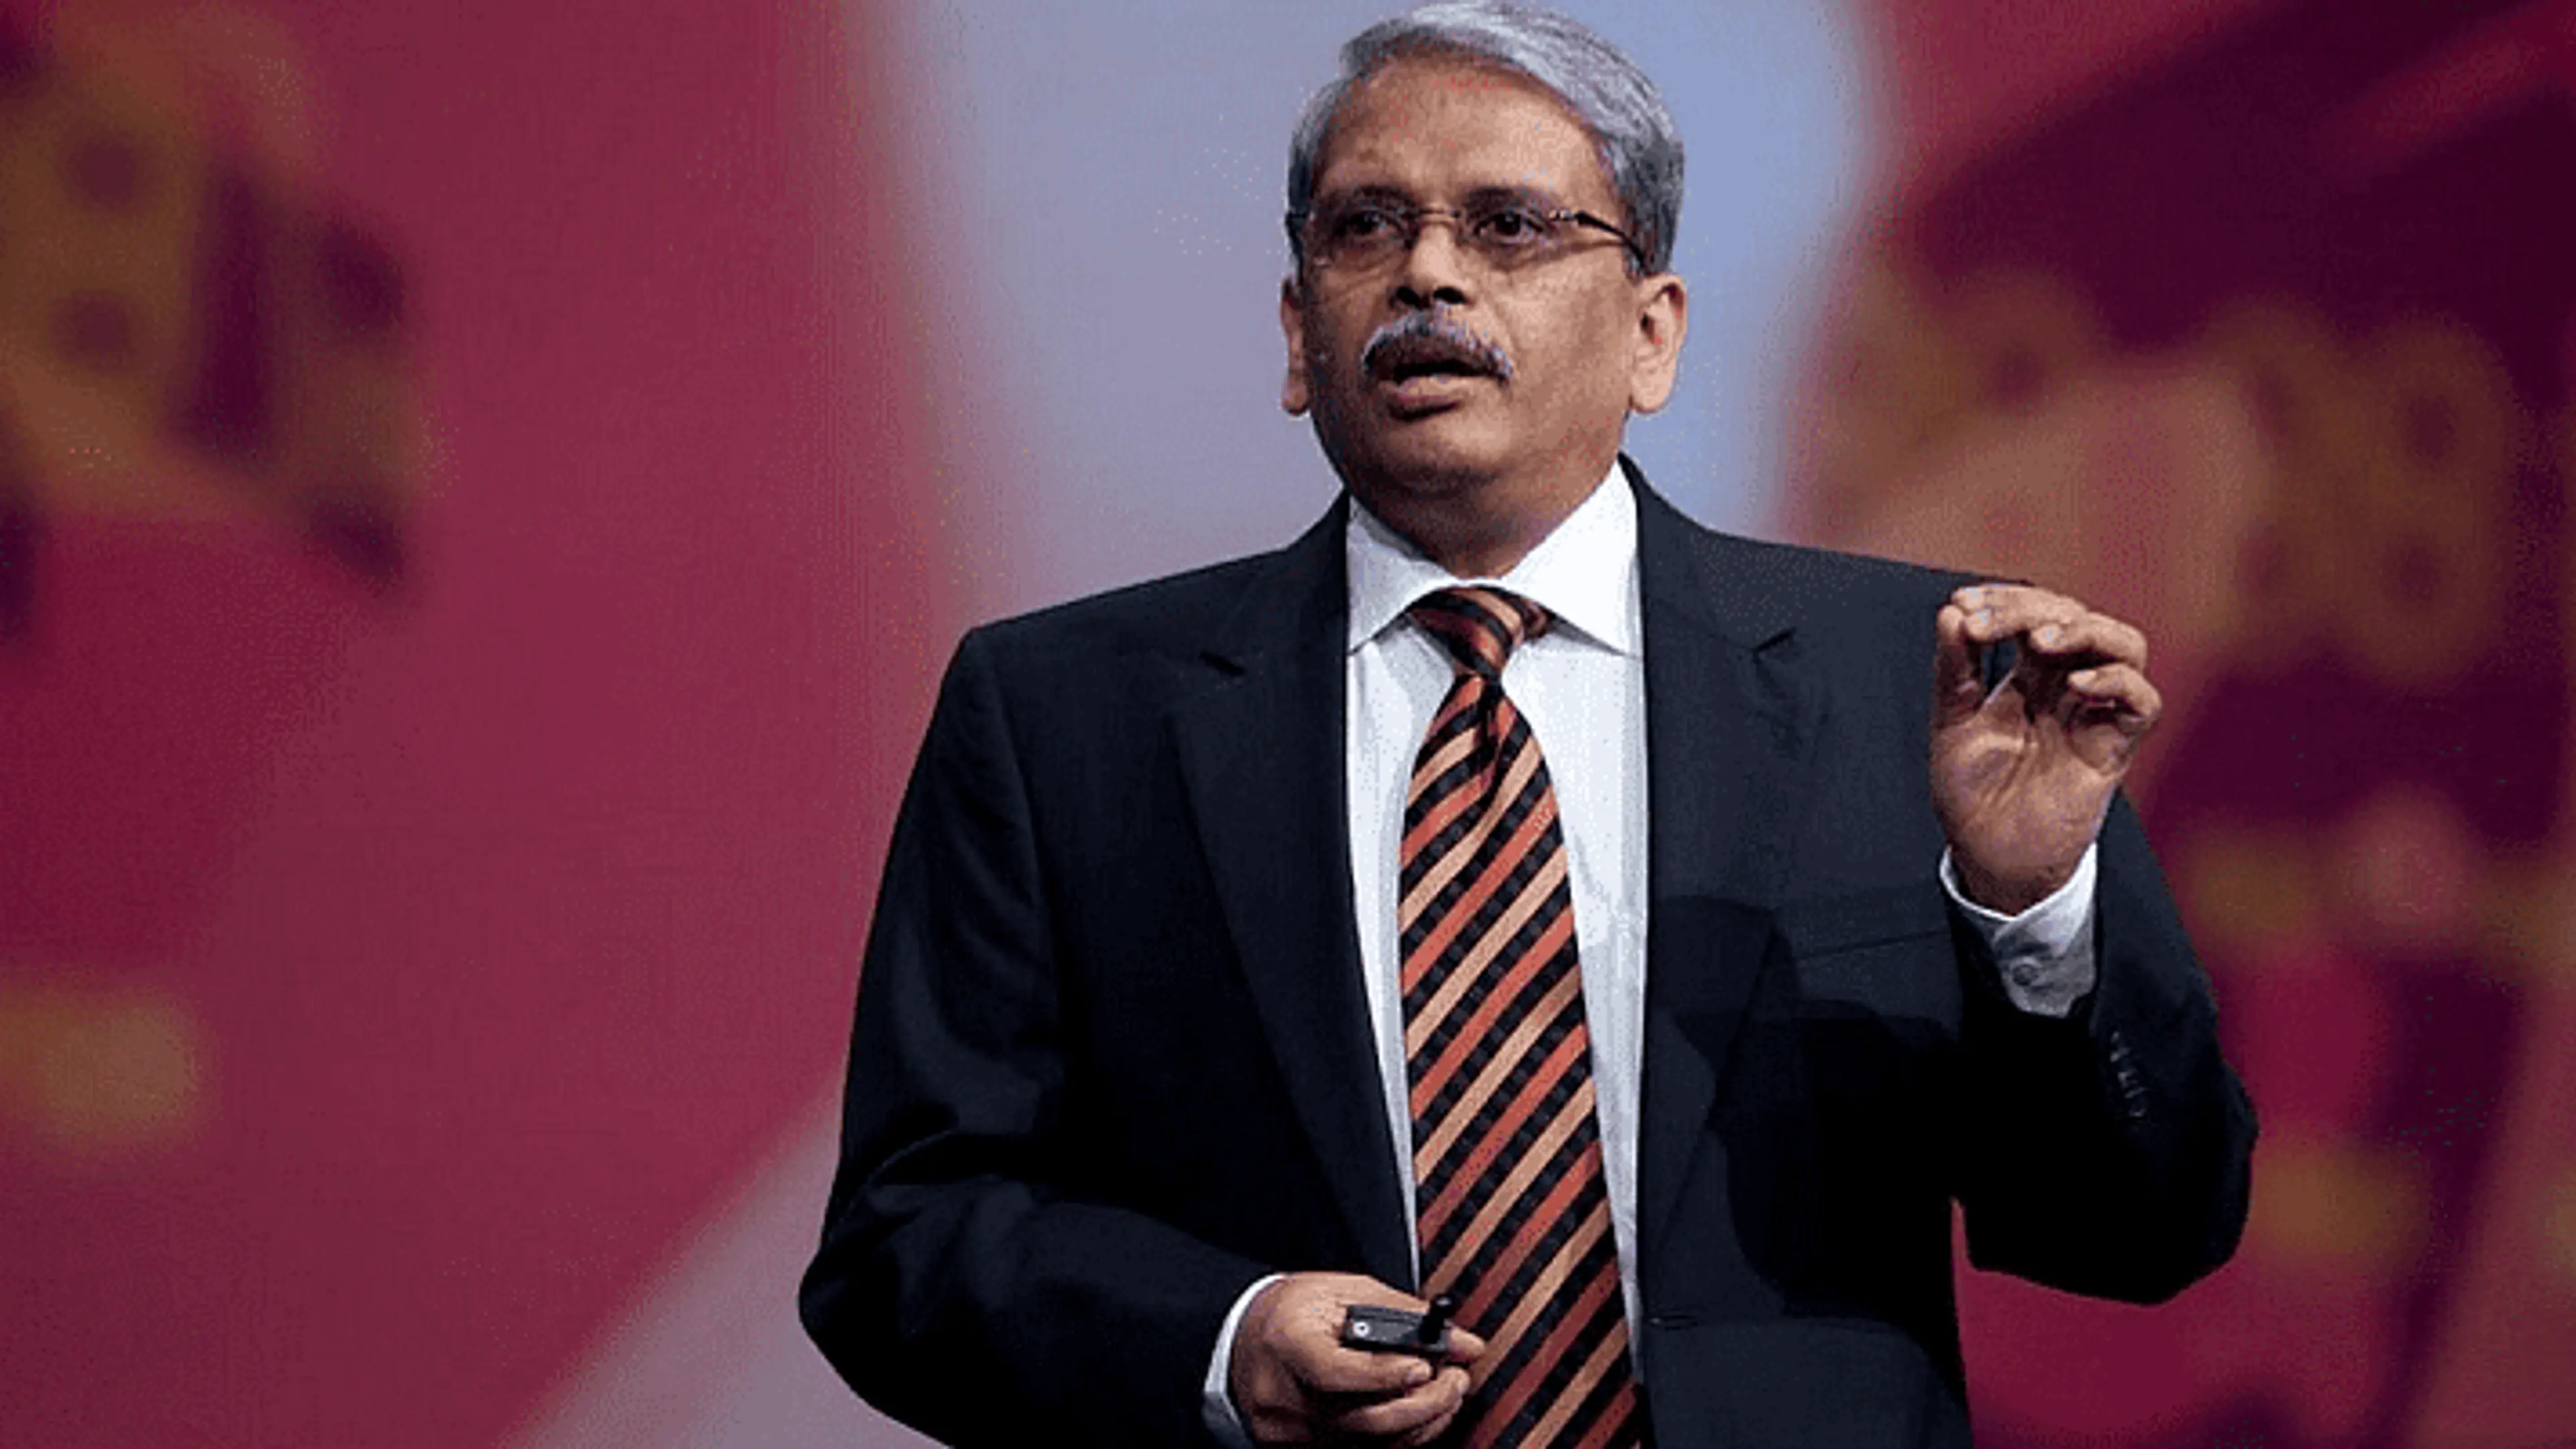 Next 30 years will be even more exciting for tech sector: Kris Gopalakrishnan